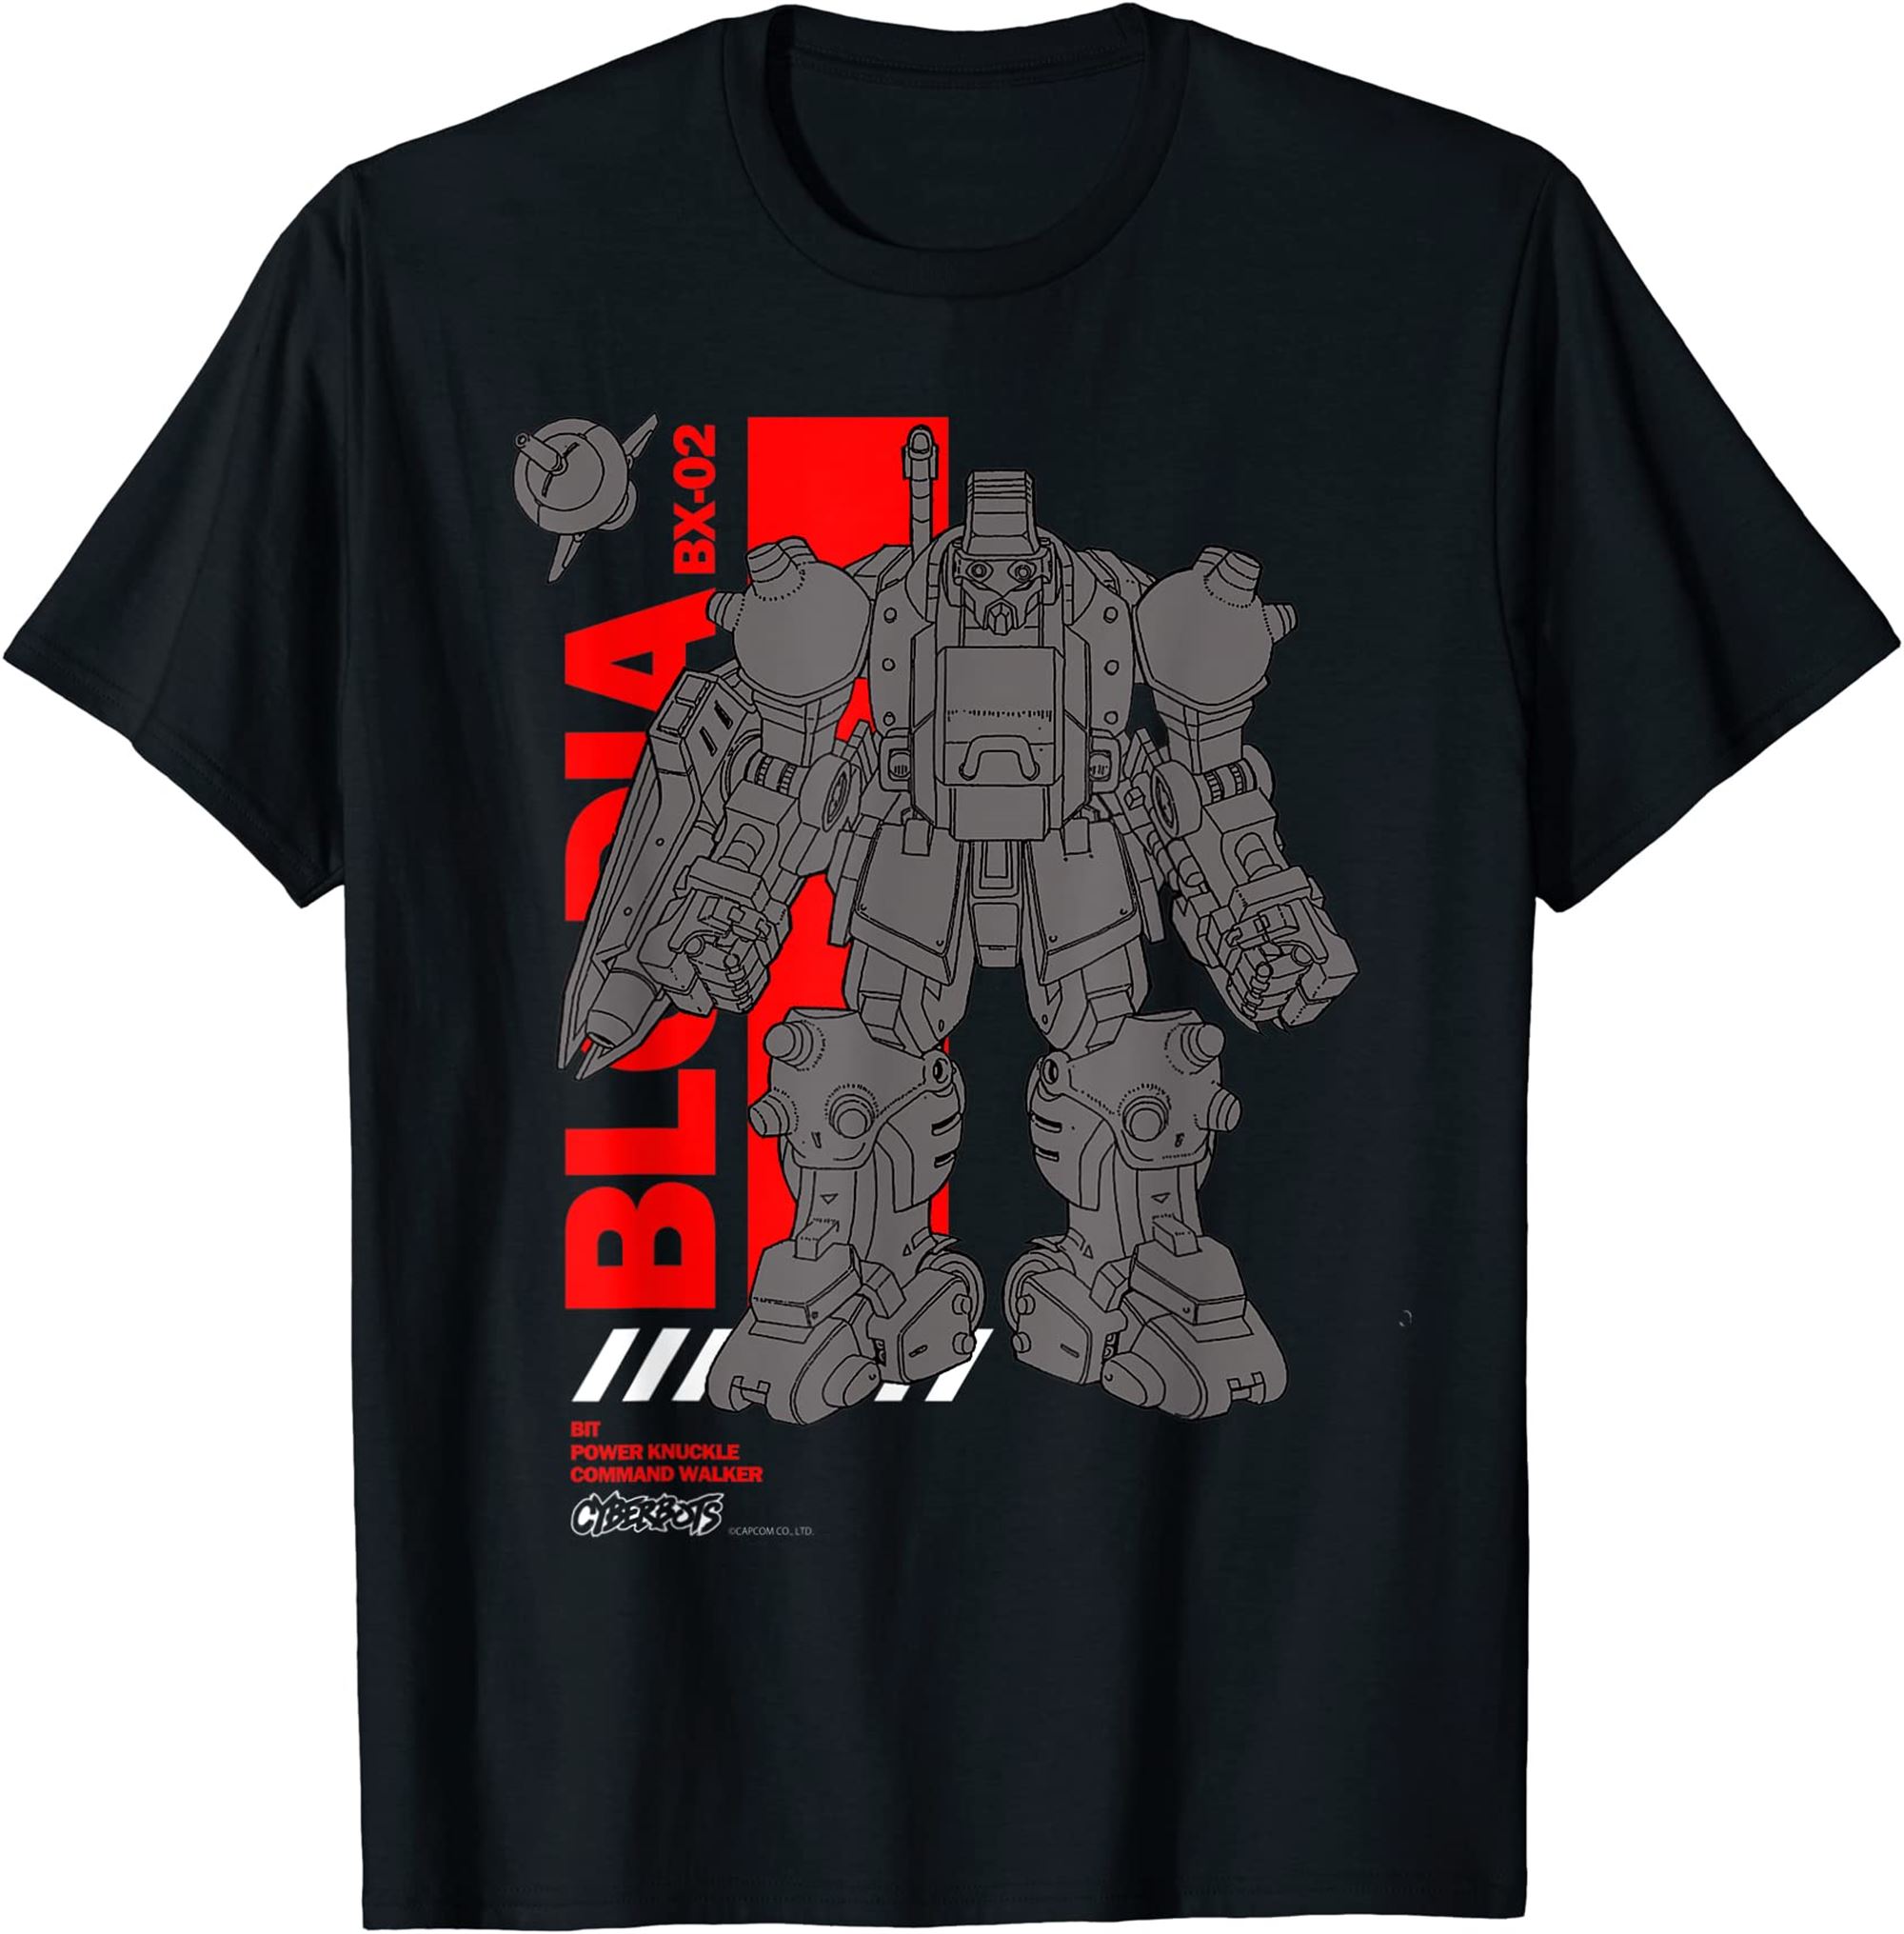 Cyberbots T-shirt Full Size Up To 5xl